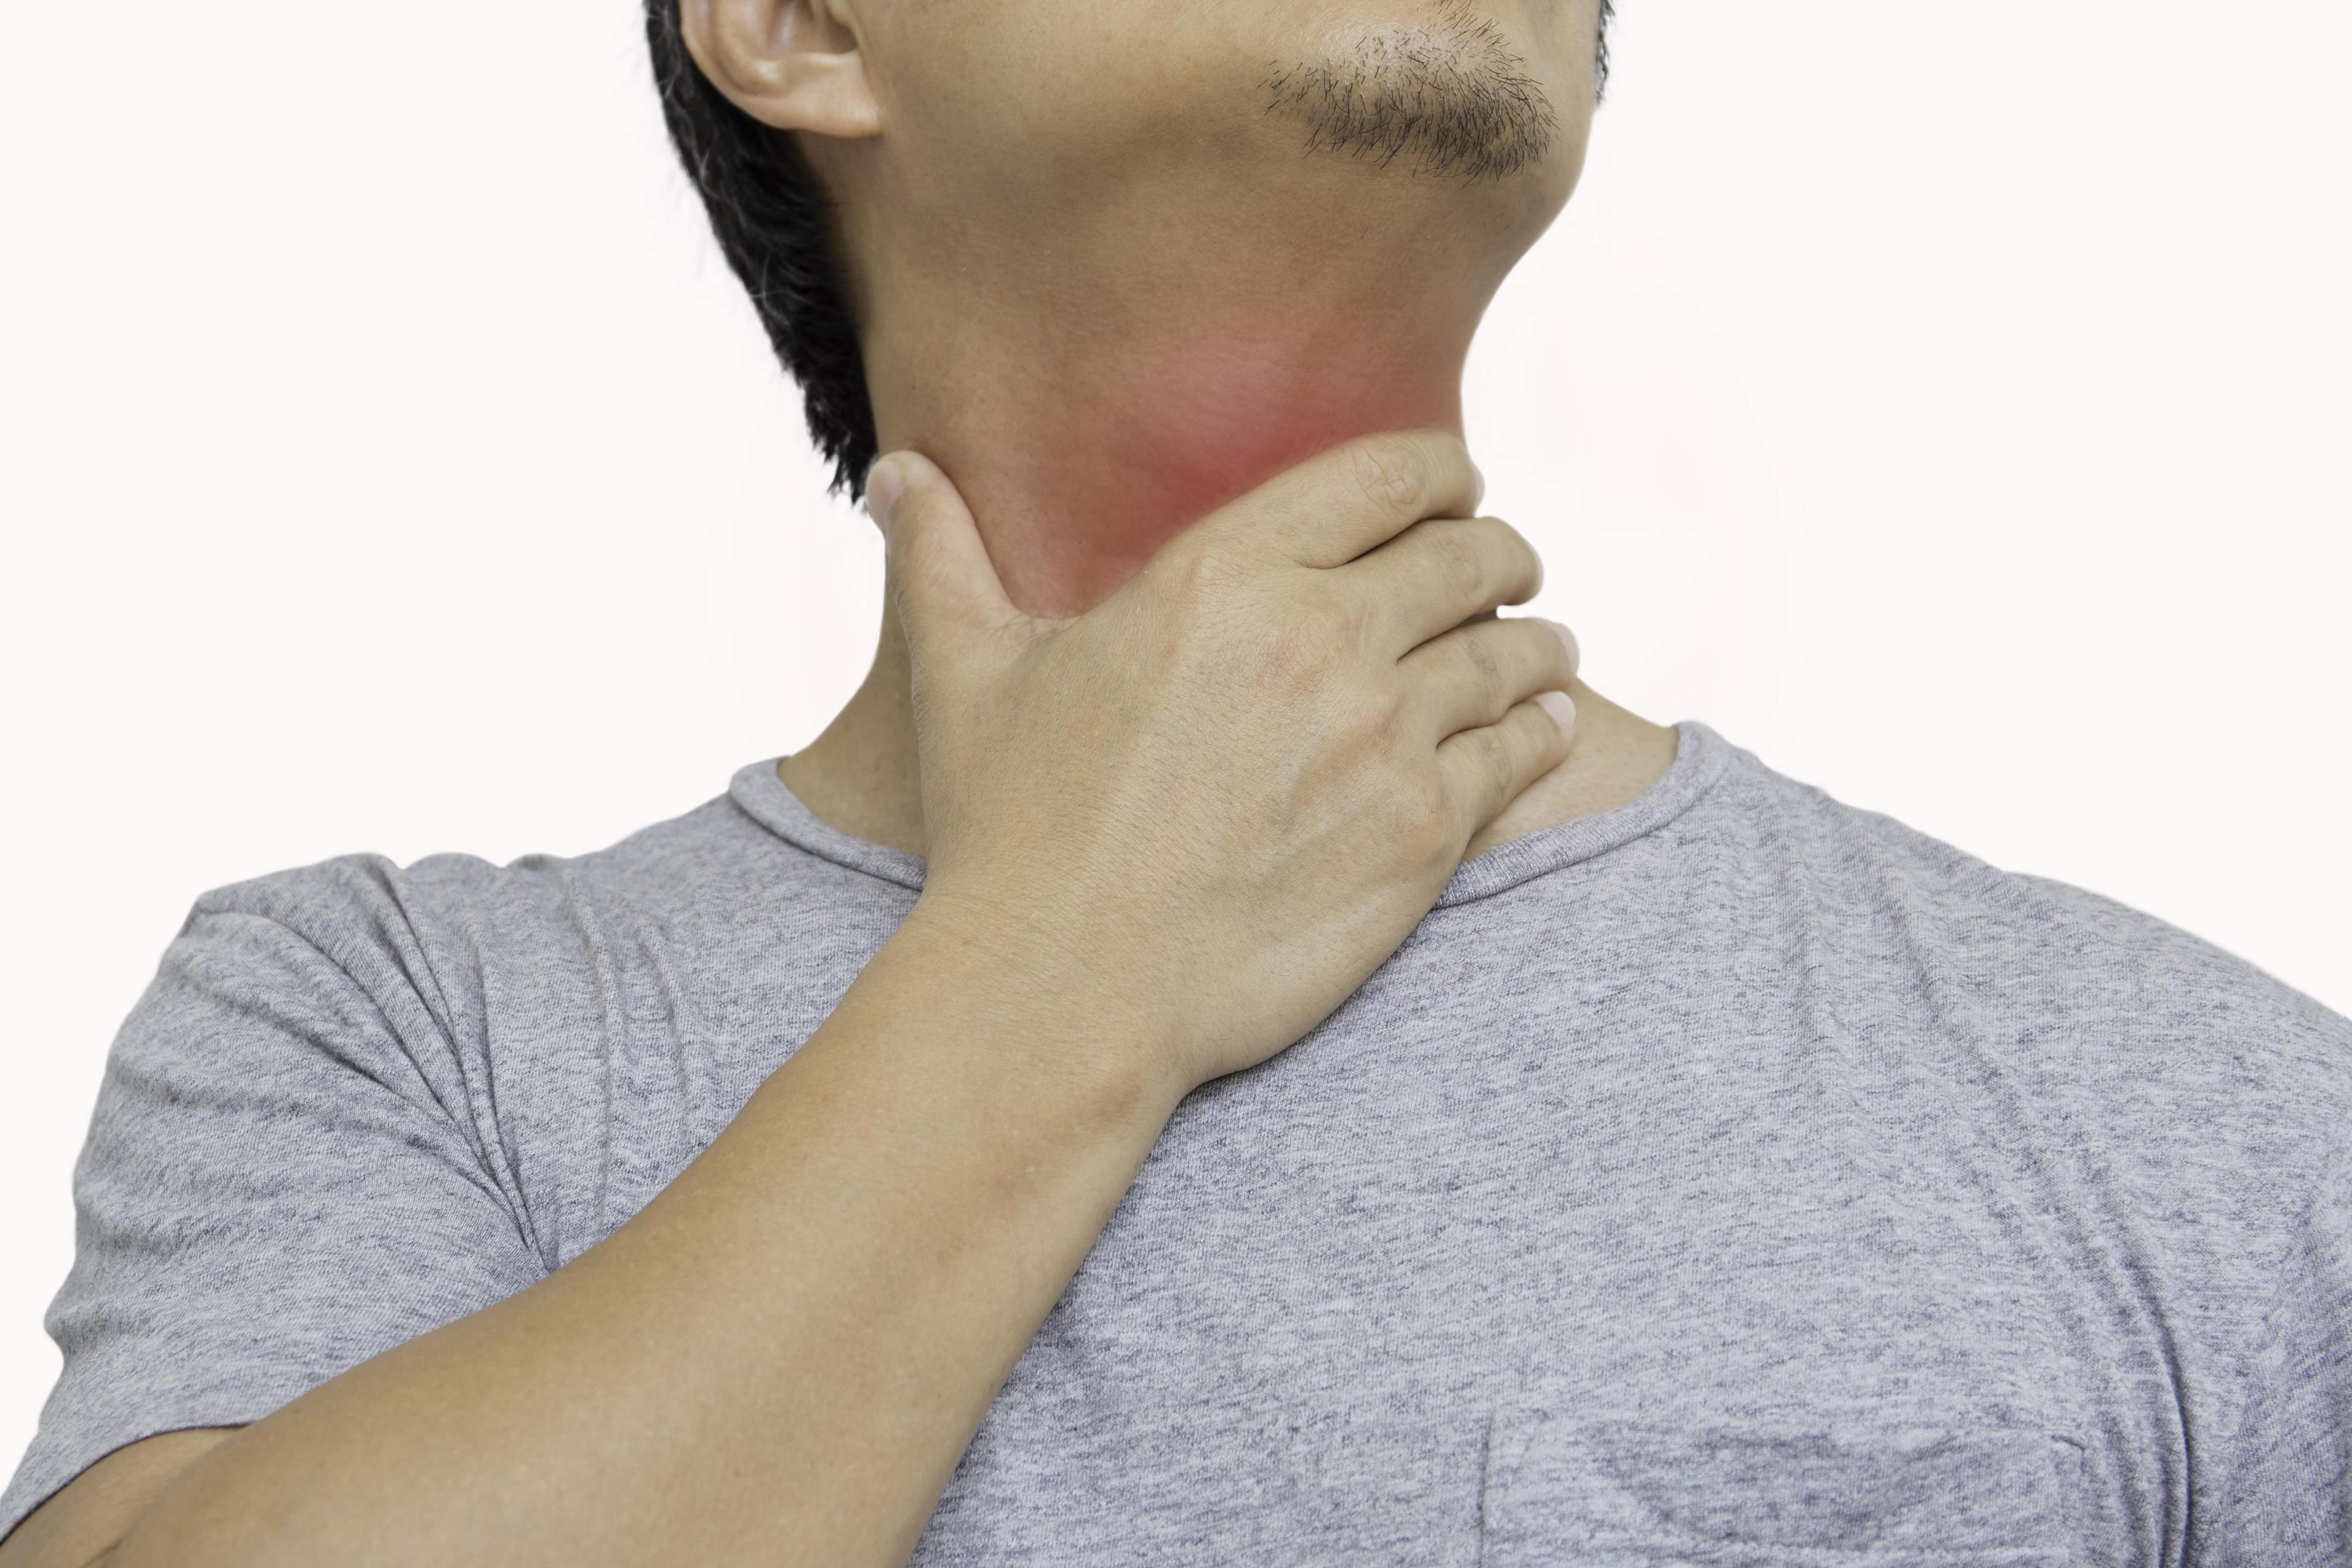 Strep Throat: Causes, Early Symptoms, Complications, Prevention